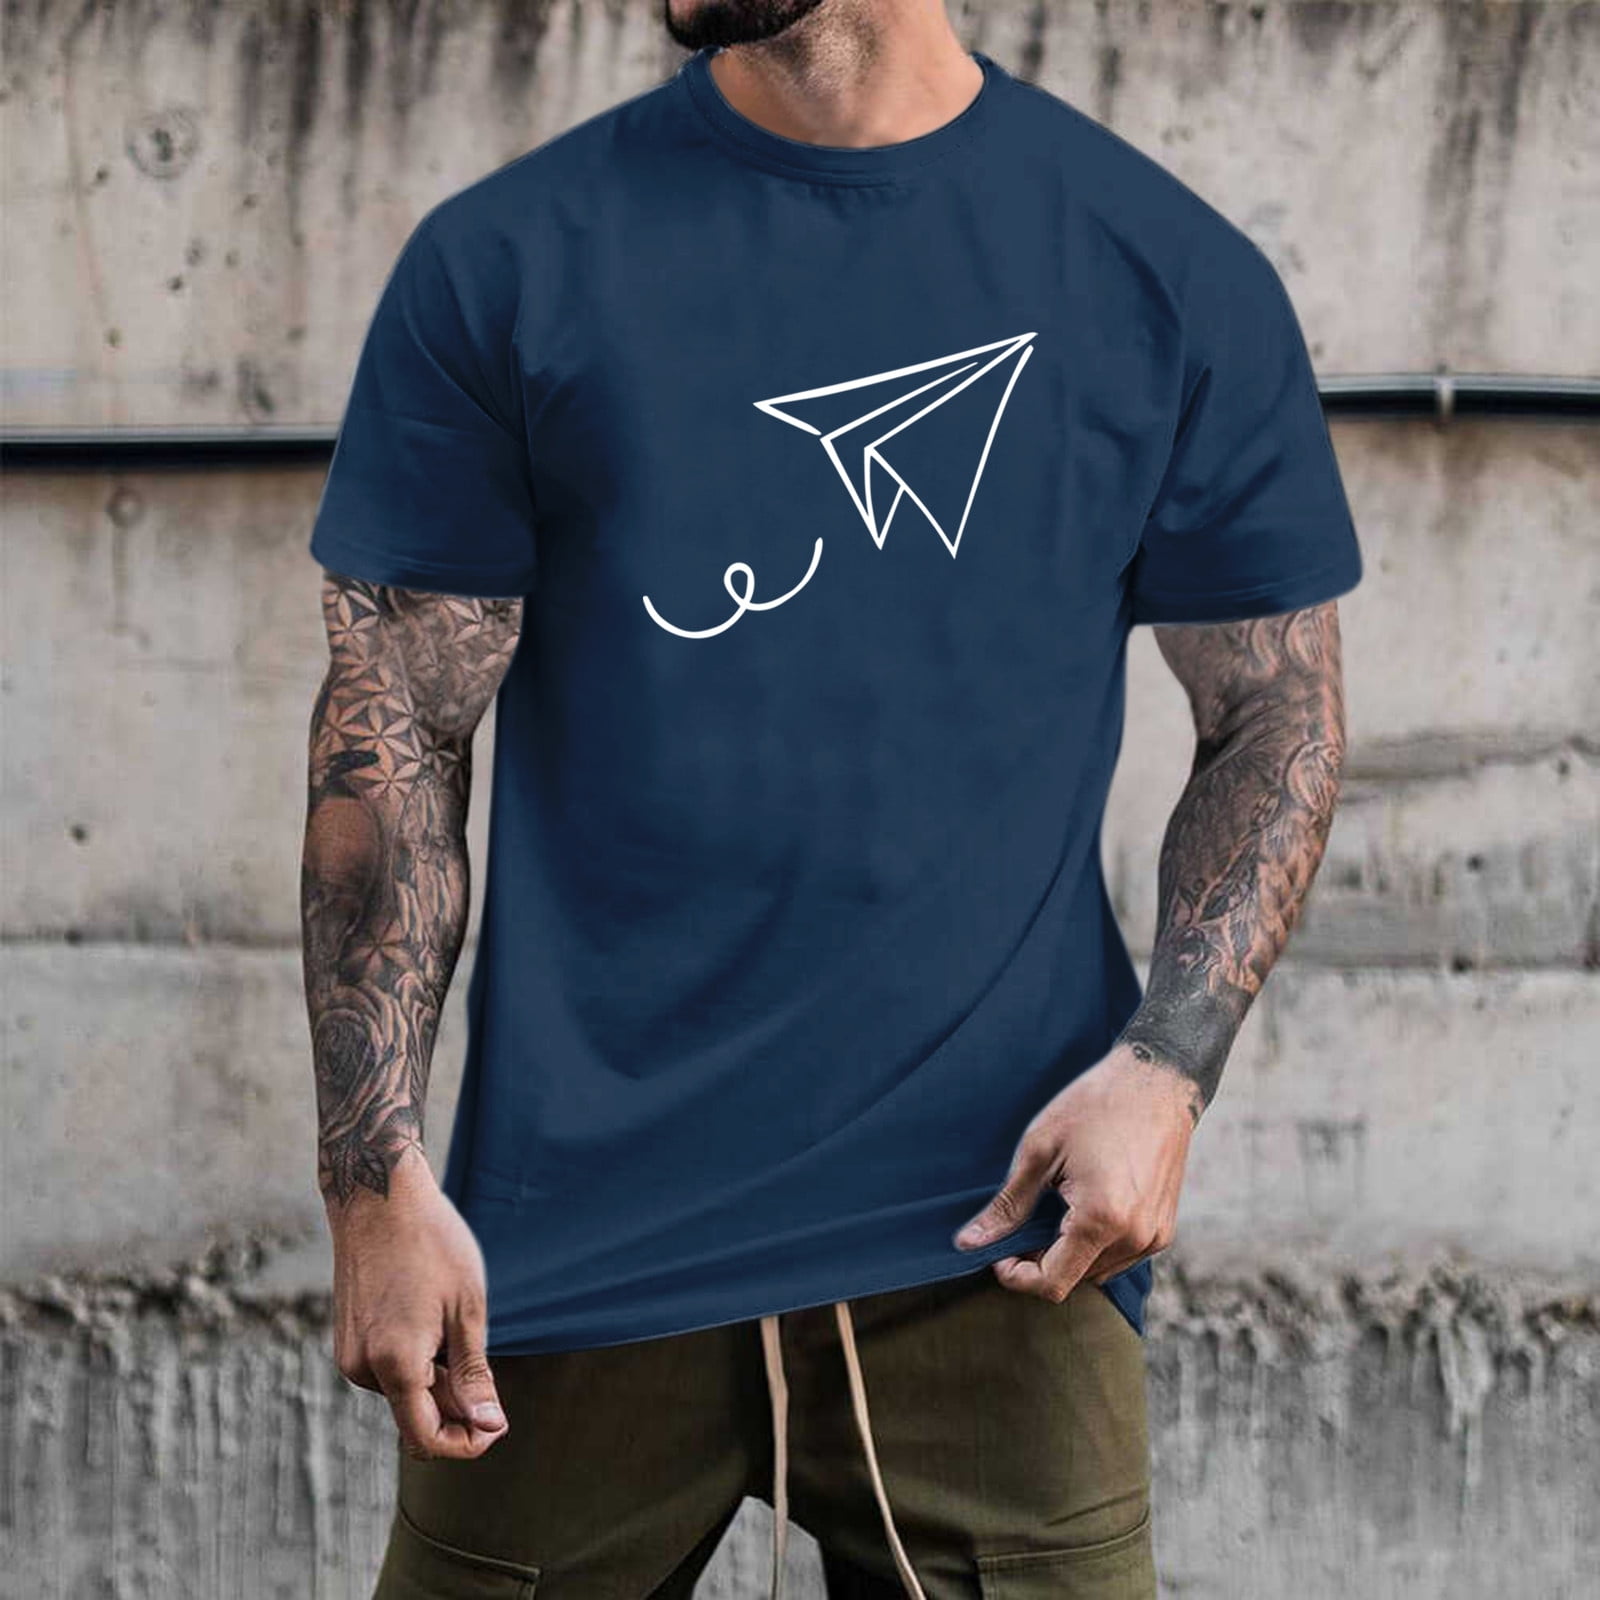 T-Shirts Male Summer Casual Paper Plane Print T Shirt Blouse Short Sleeve  Round Neck Tops 